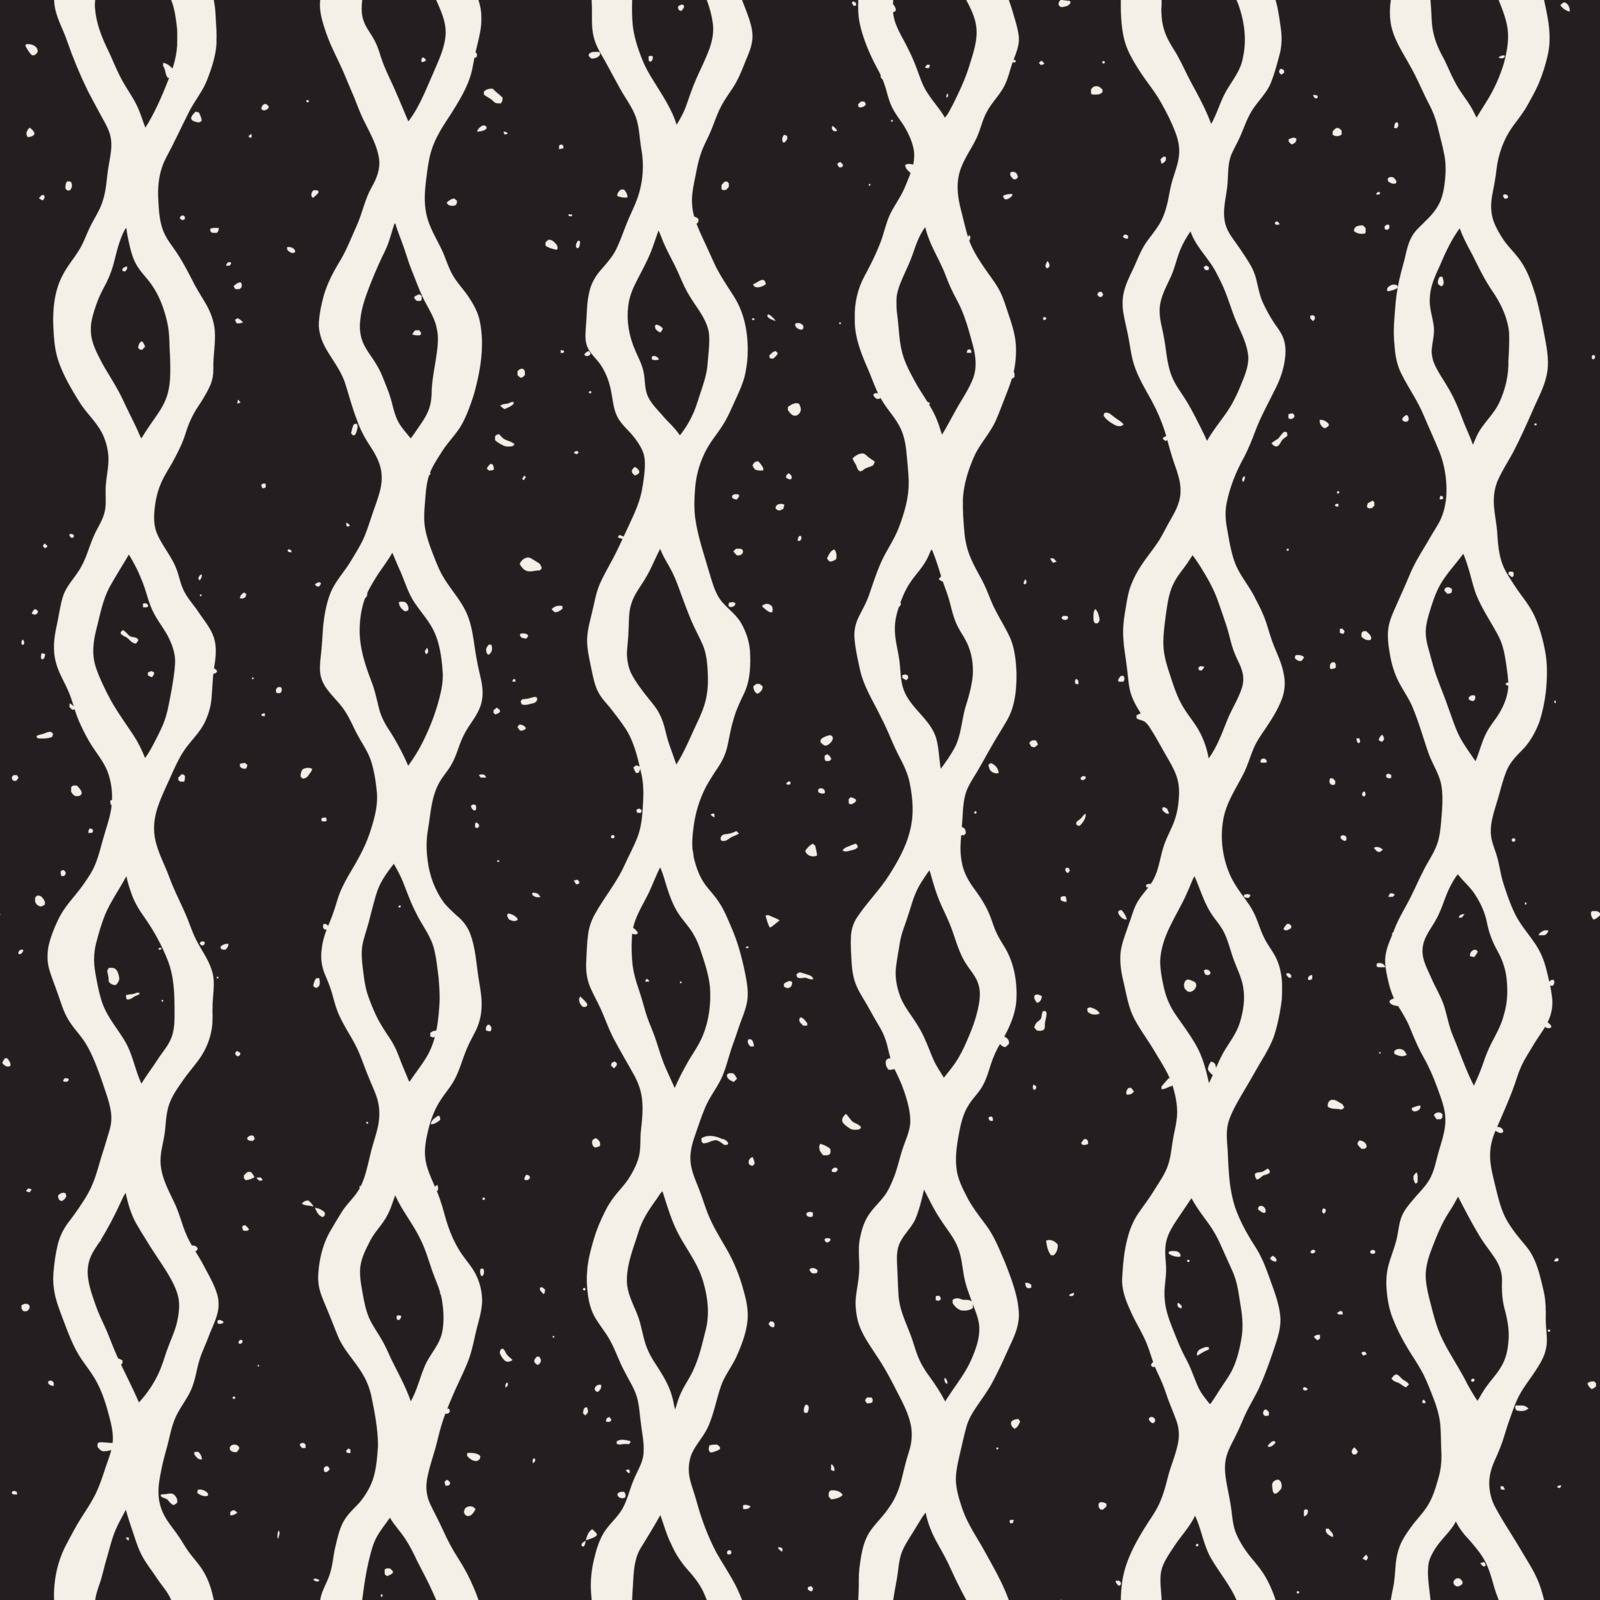 Vector Seamless Black And White Hand Drawn Vertical Braid Wavy Lines Grunge Pattern. Abstract Freehand Background Design